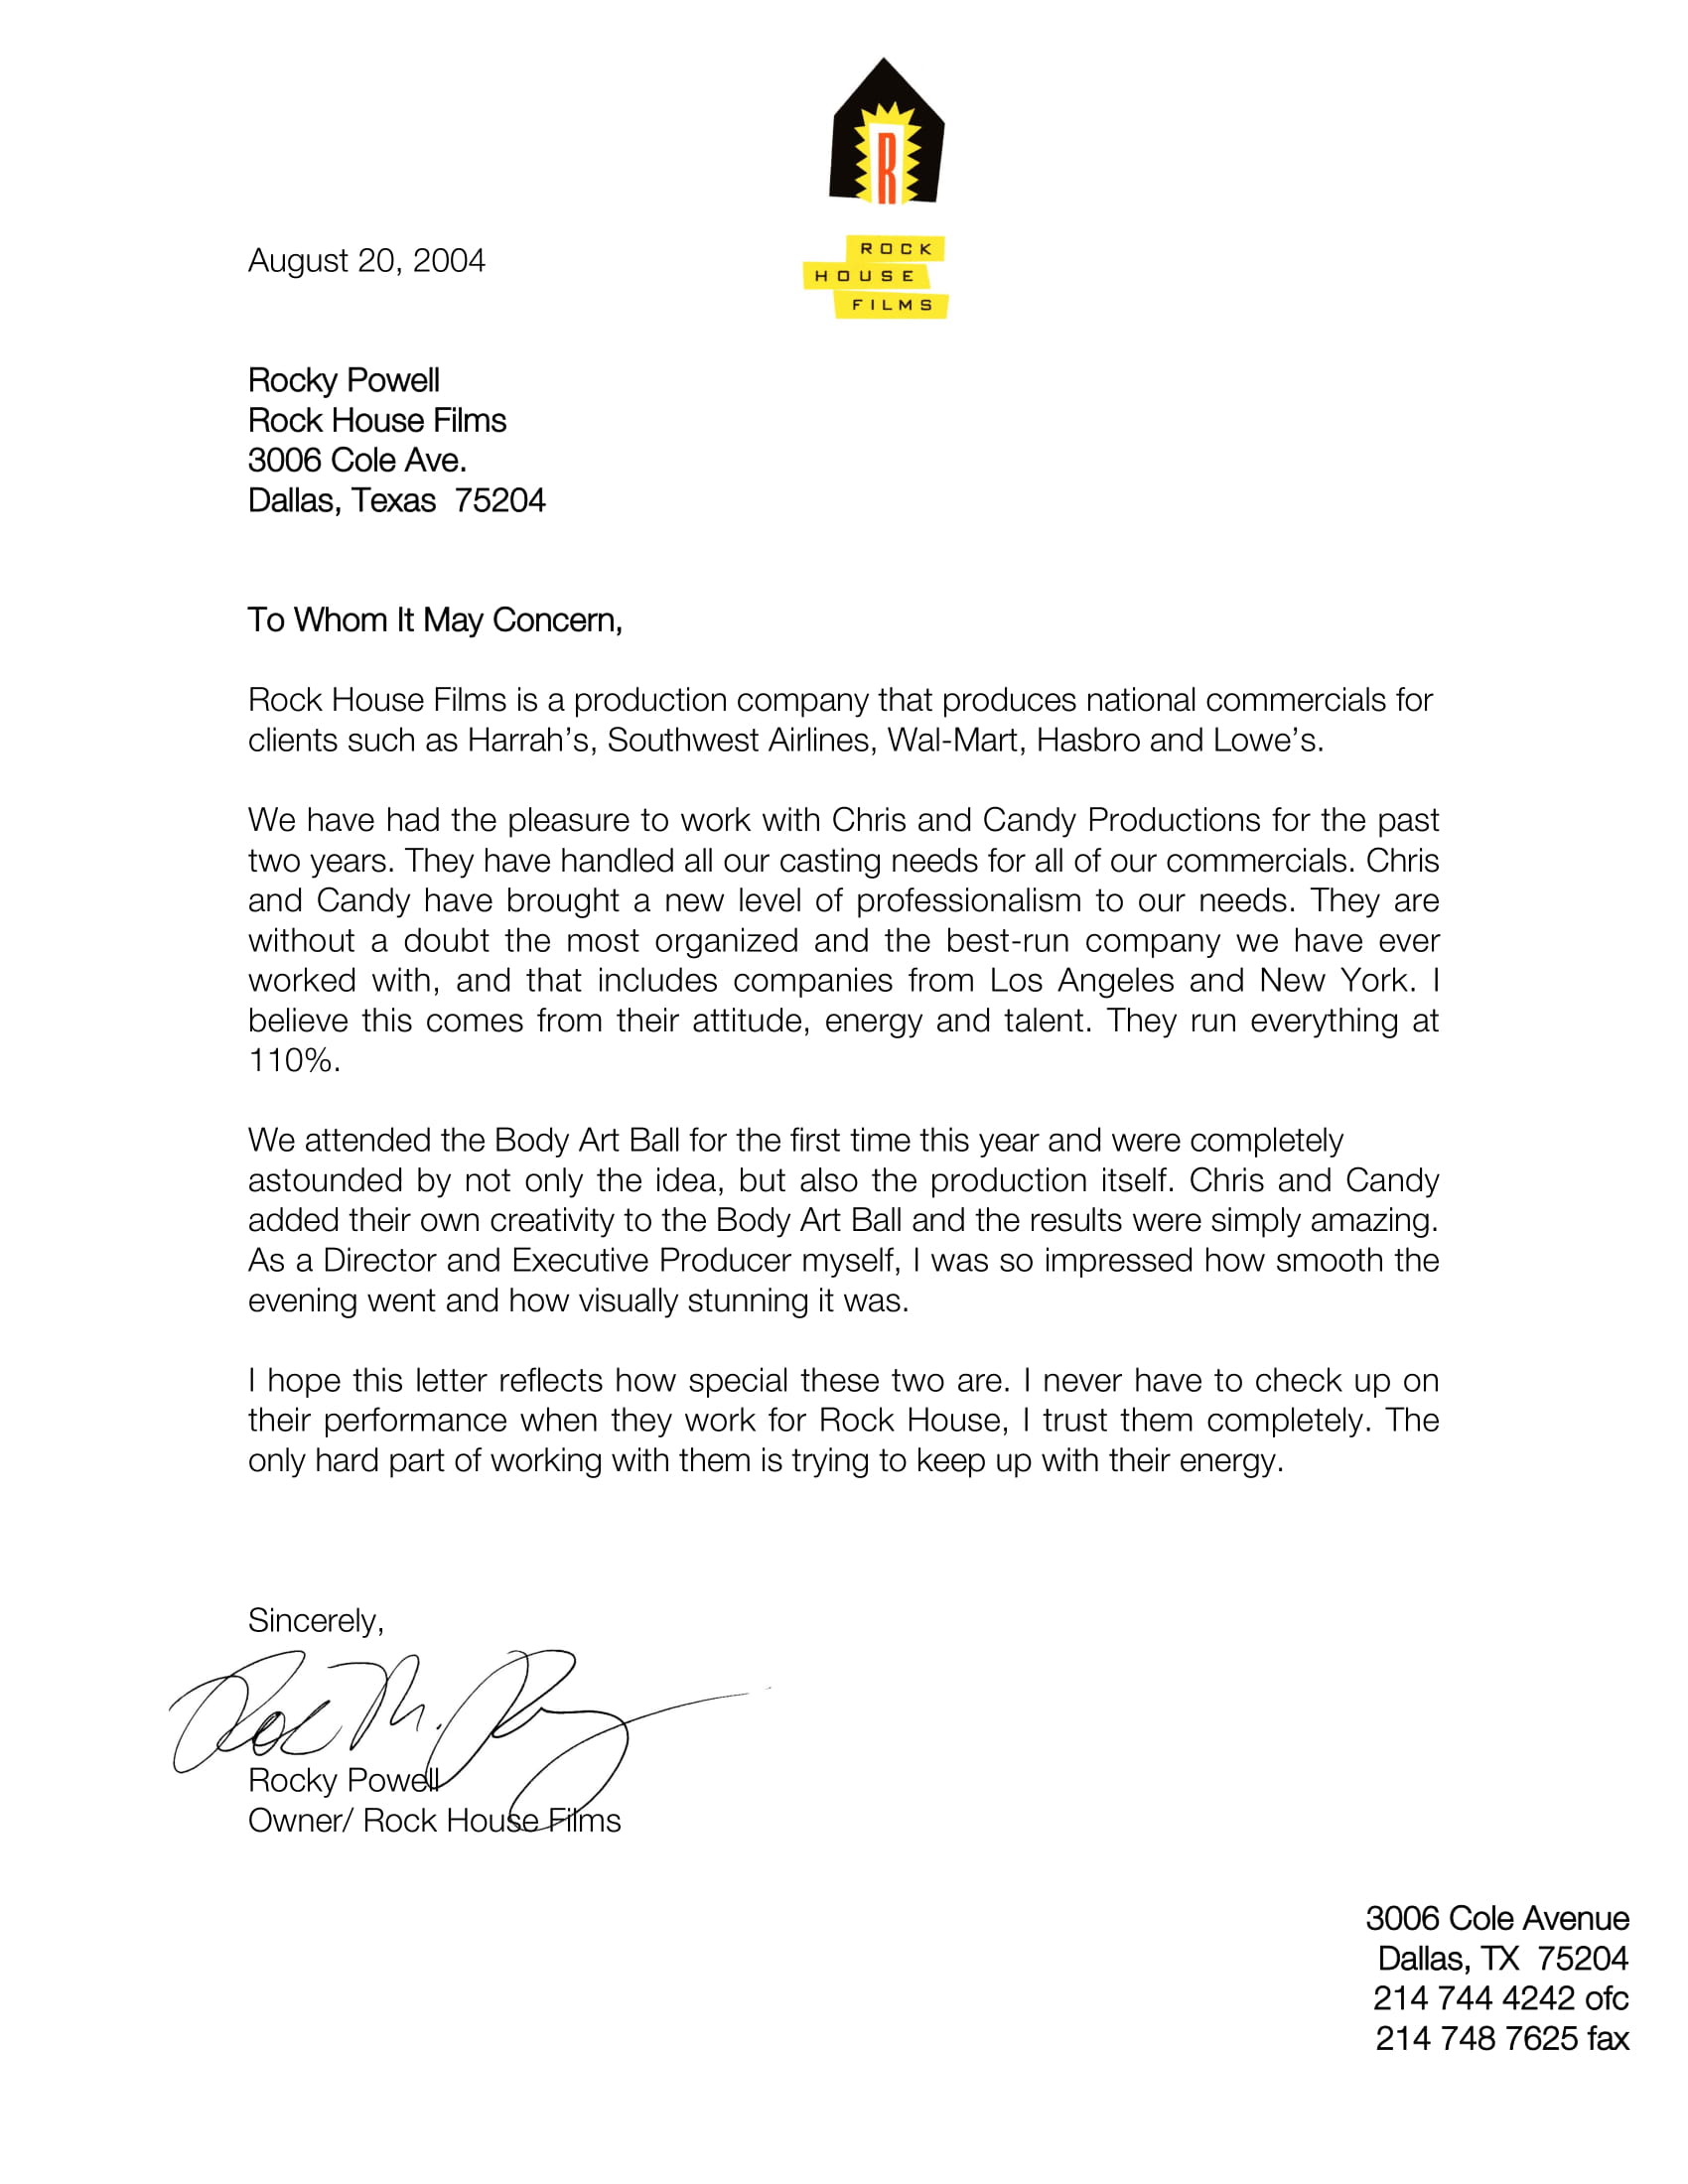 10+ Business Reference Letter Examples - PDF | Examples